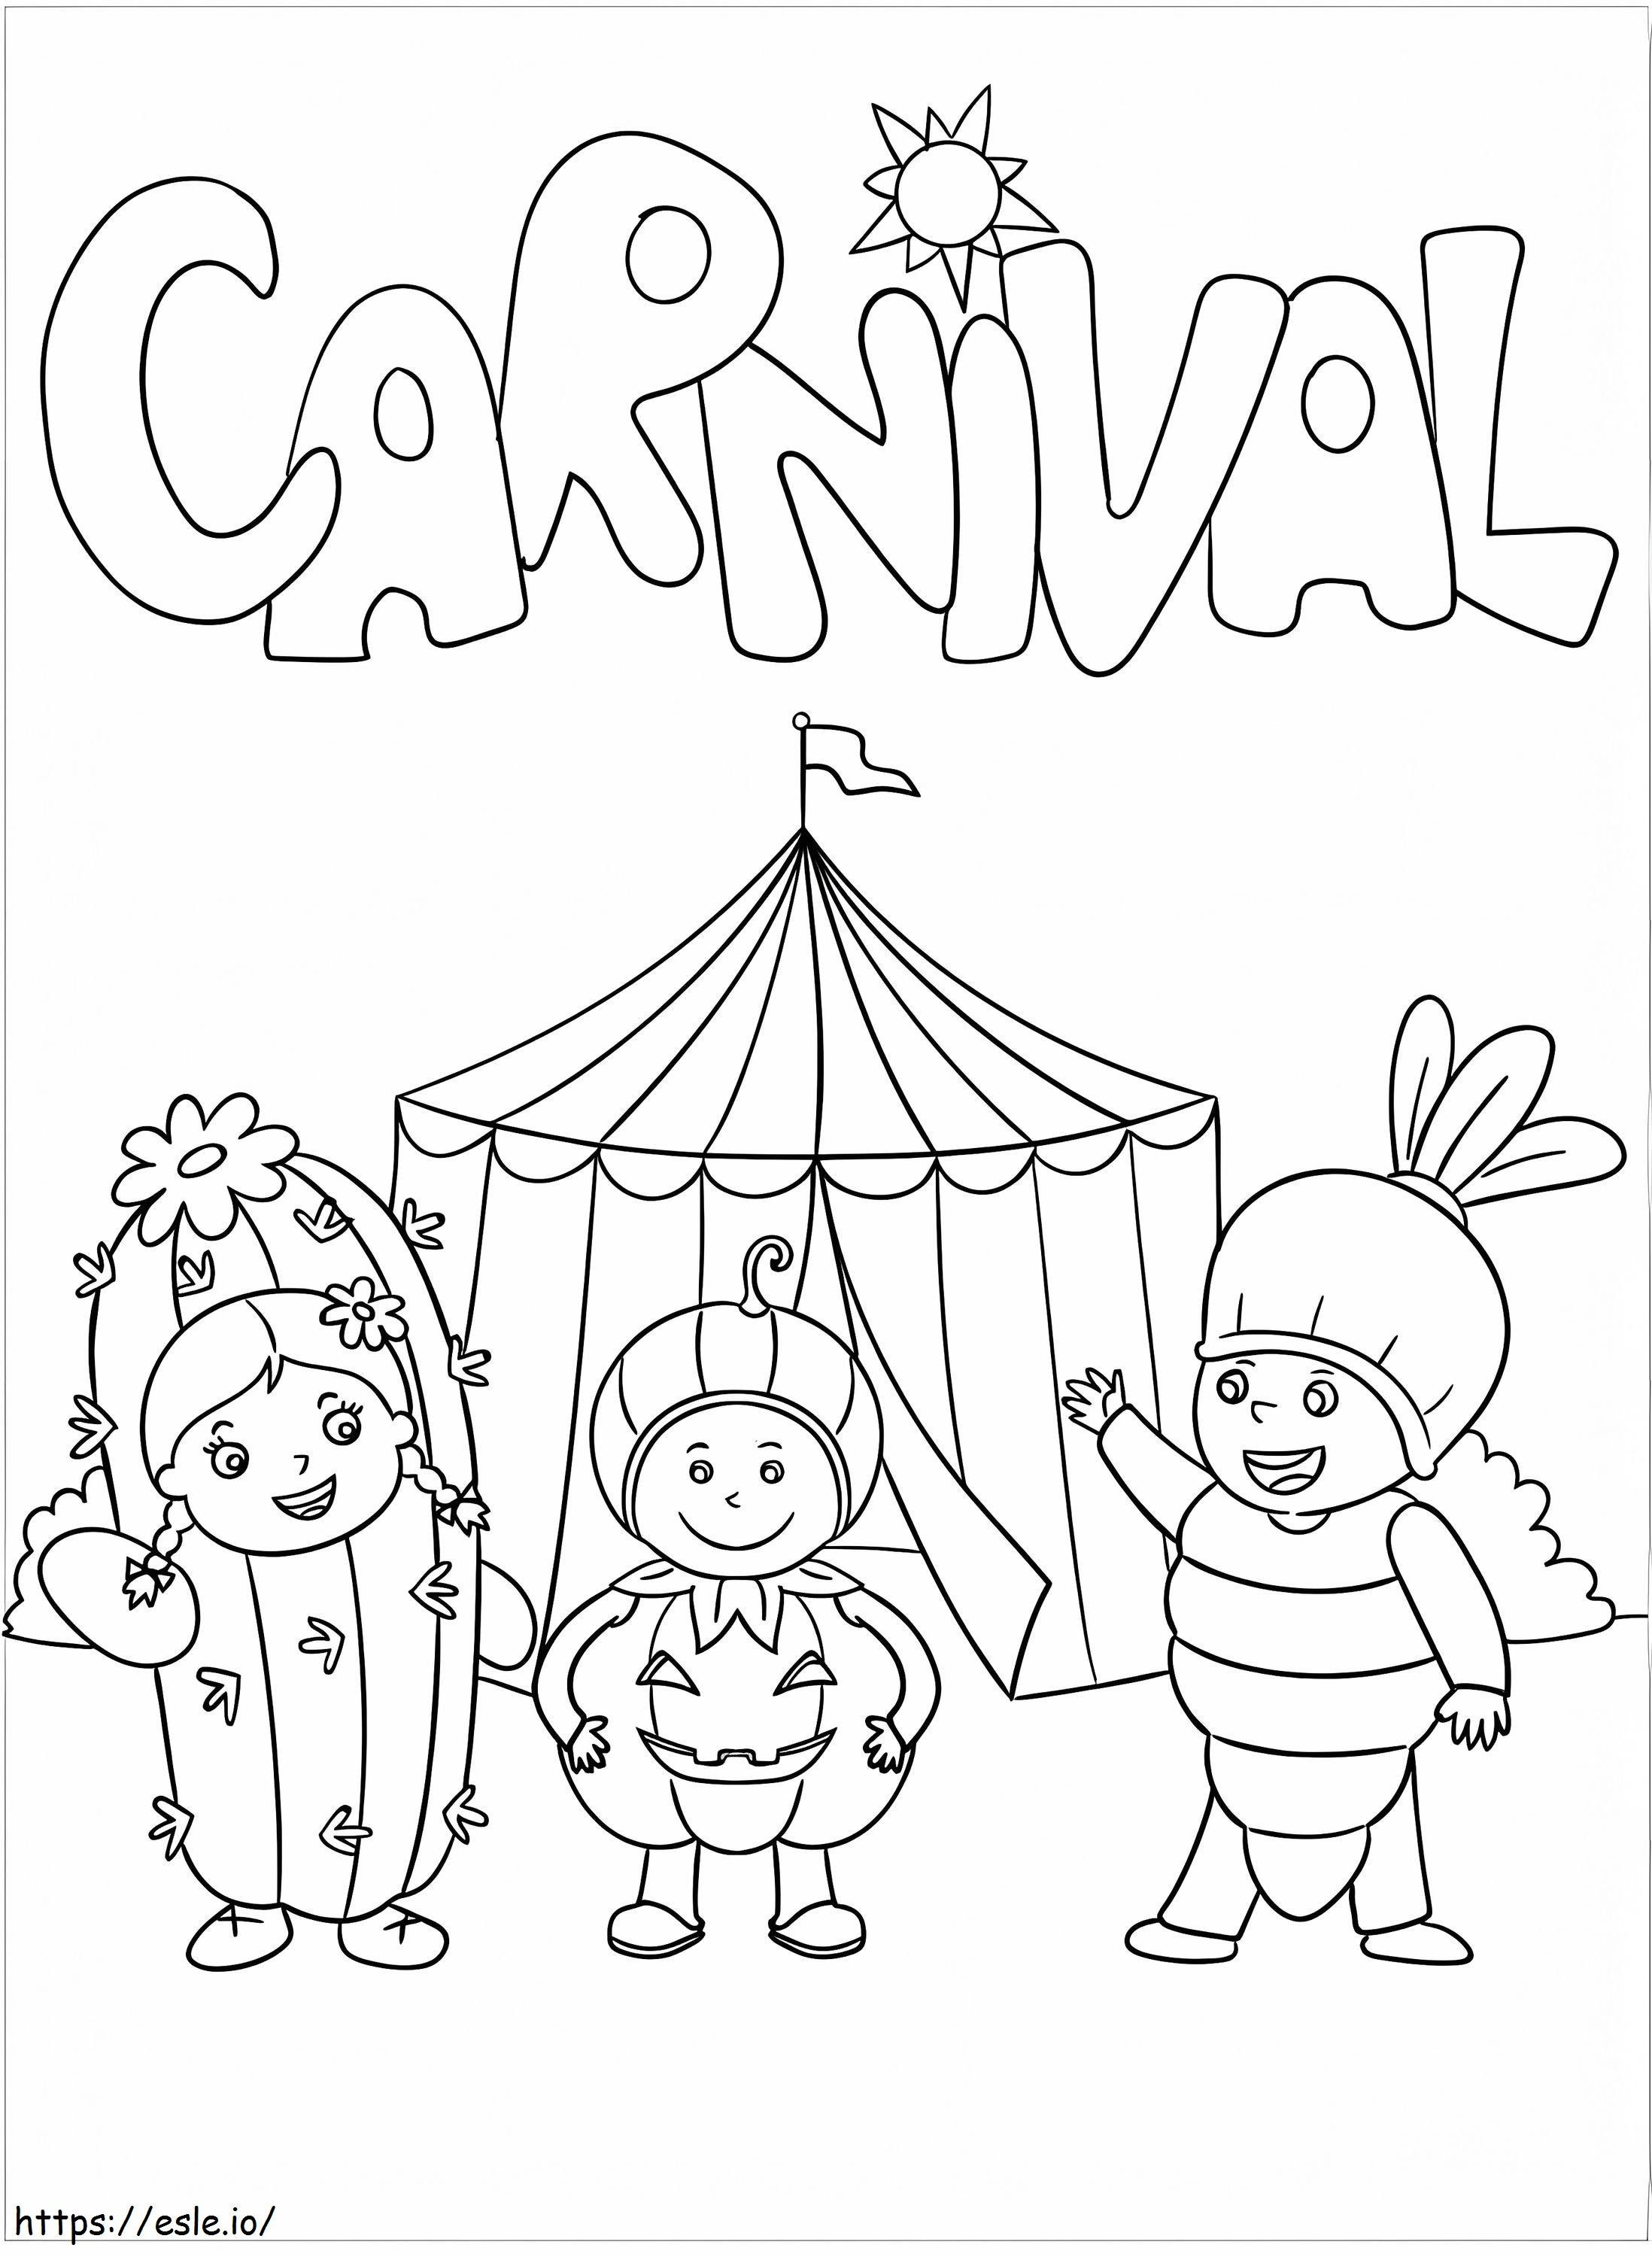 Adorable Carnival coloring page